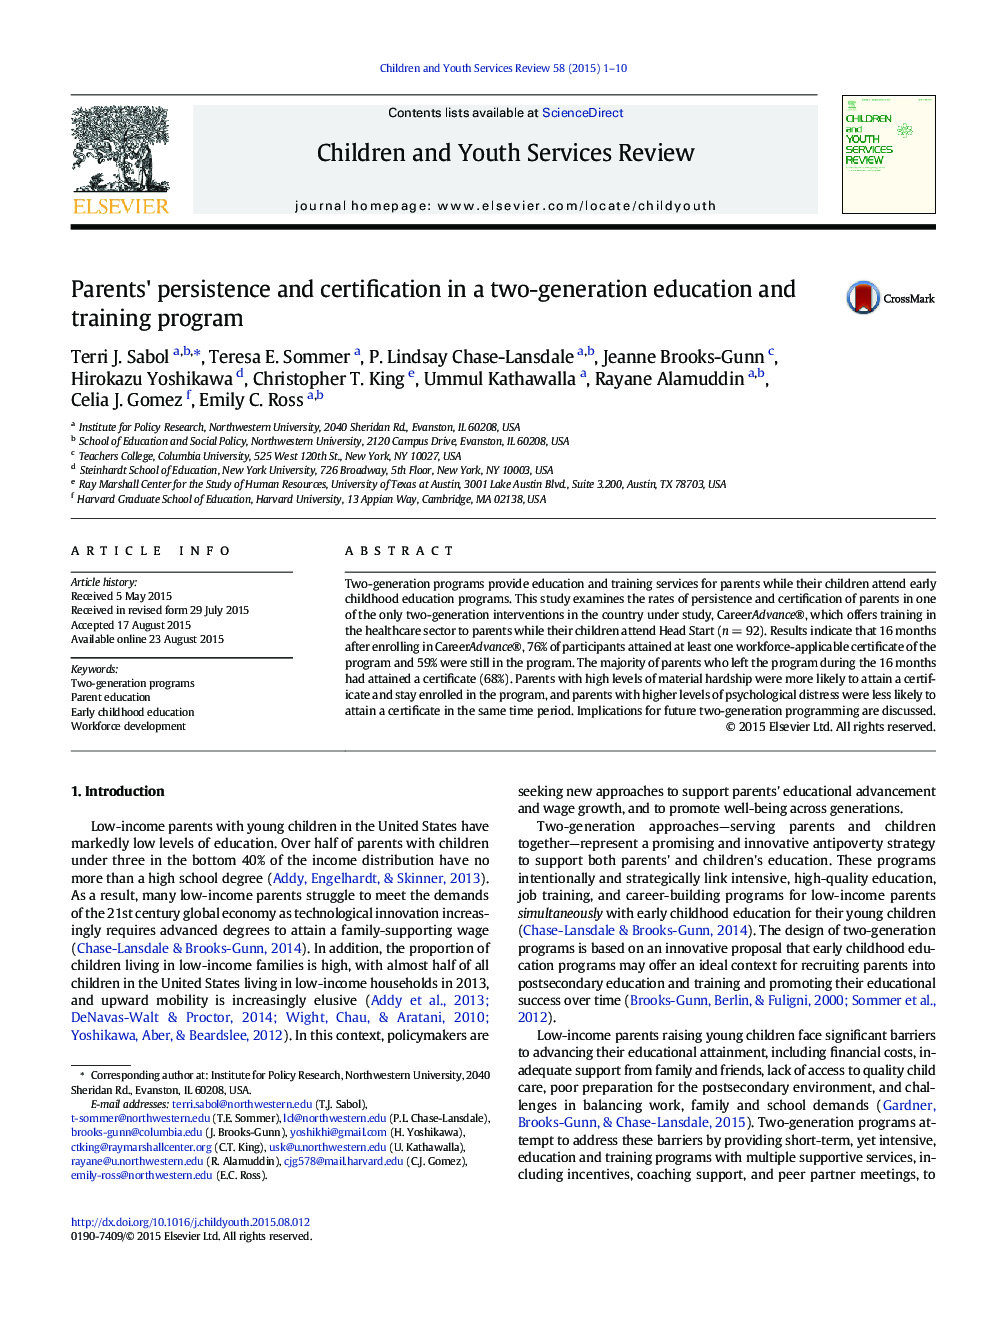 Parents' persistence and certification in a two-generation education and training program